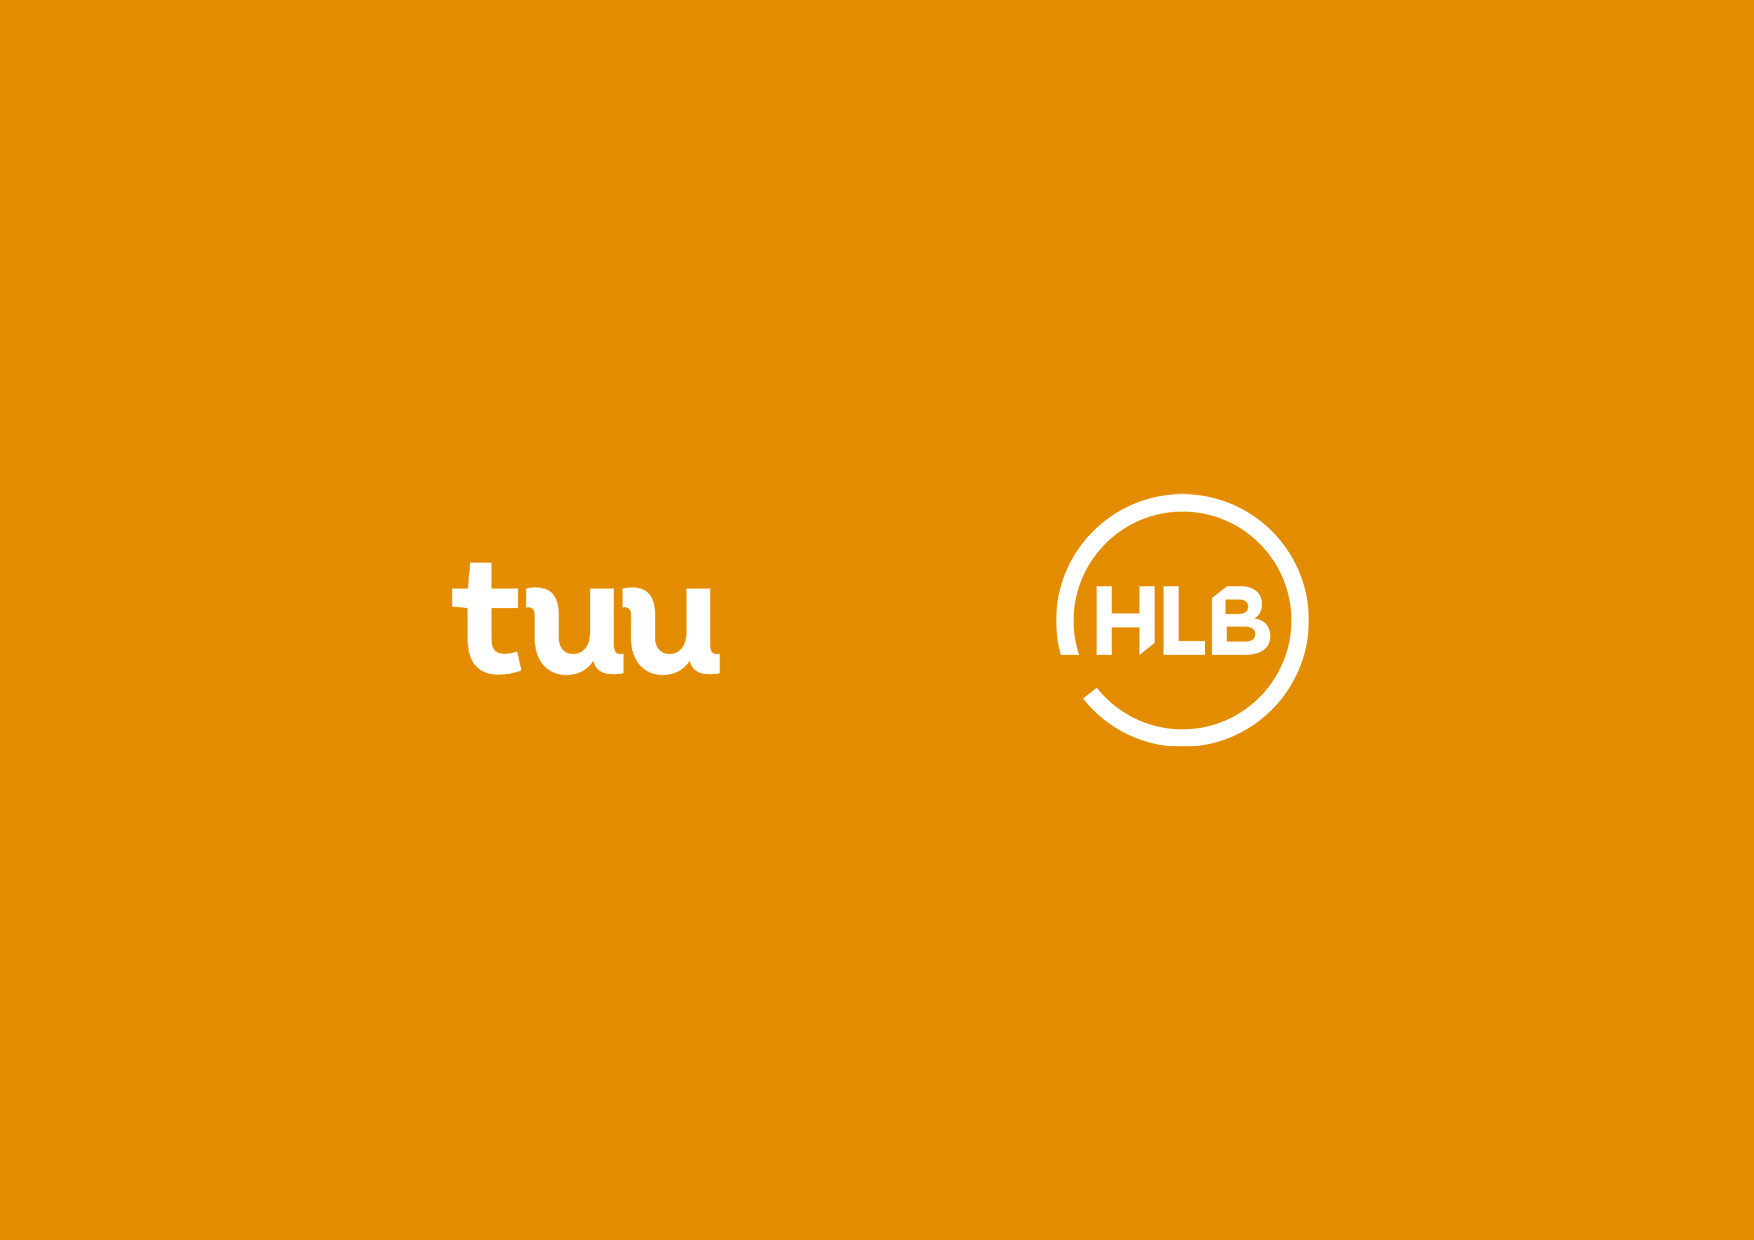 This is an image of two logos, Tuu on the left, HLB on the right, to promote a data assurance partnership